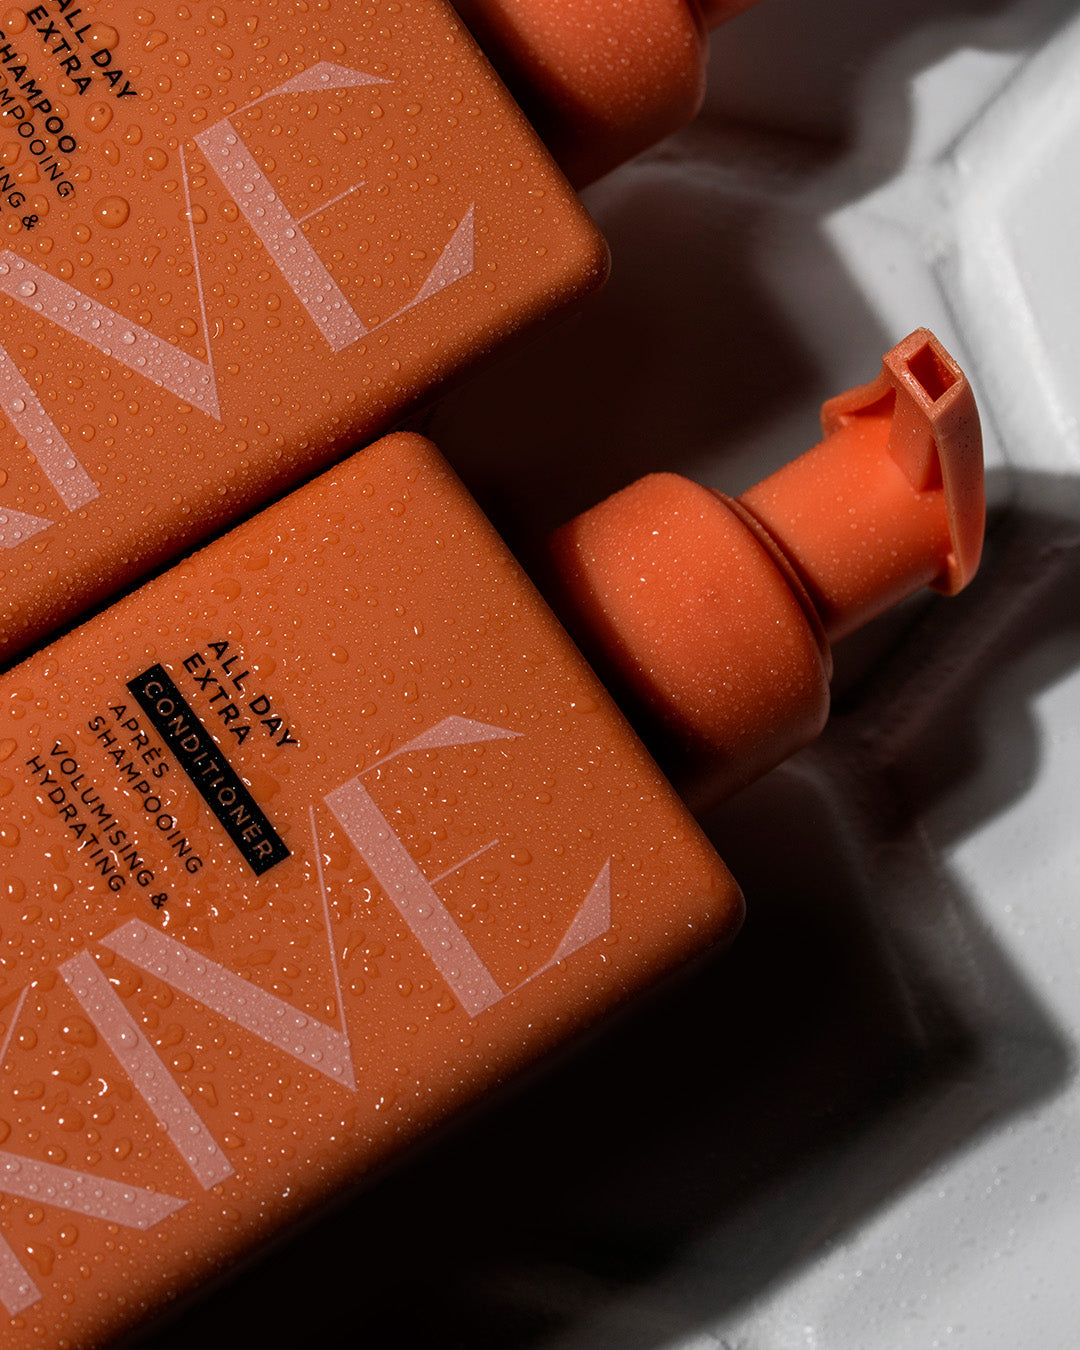 A bottle of Arkive's innovative gel cream conditioner lying next to the all day extra shampoo